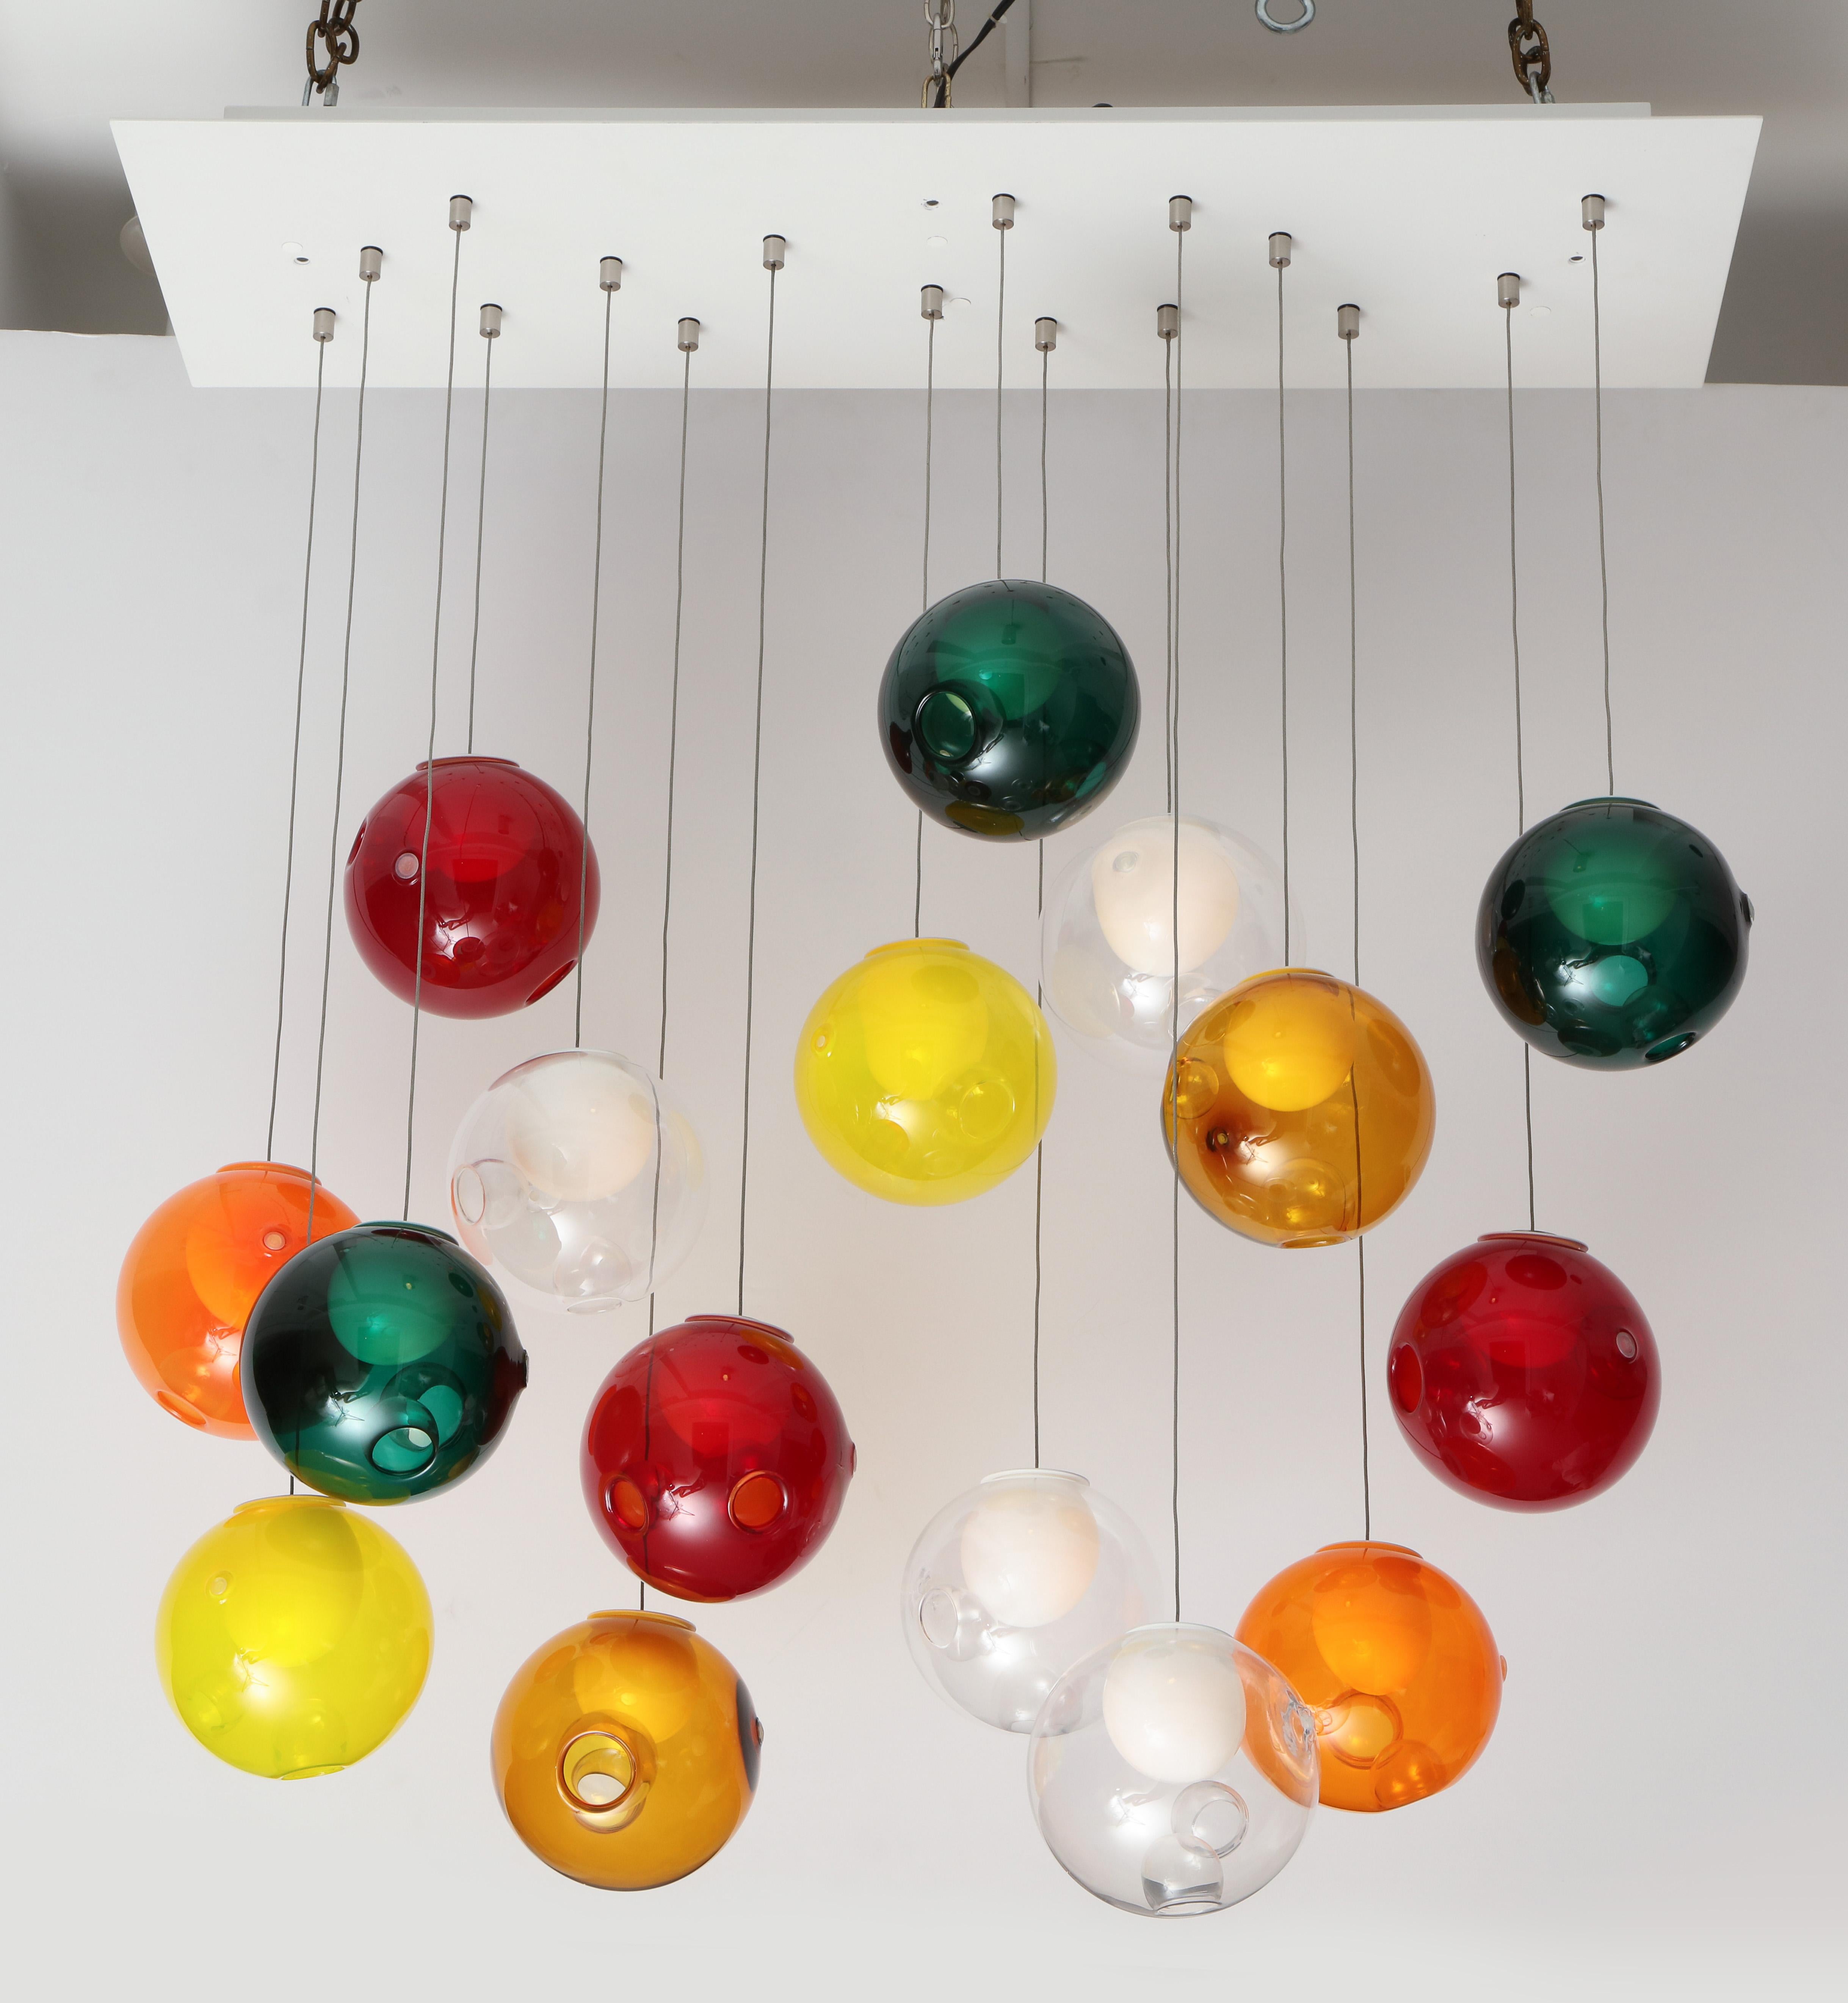 Wonderful Italian ball chandelier.
The large rectangle metal plate supports sixteen suspended handblown glass ball globes 
each with their own light source that when illuminated creates a Fabulously fun chandelier.